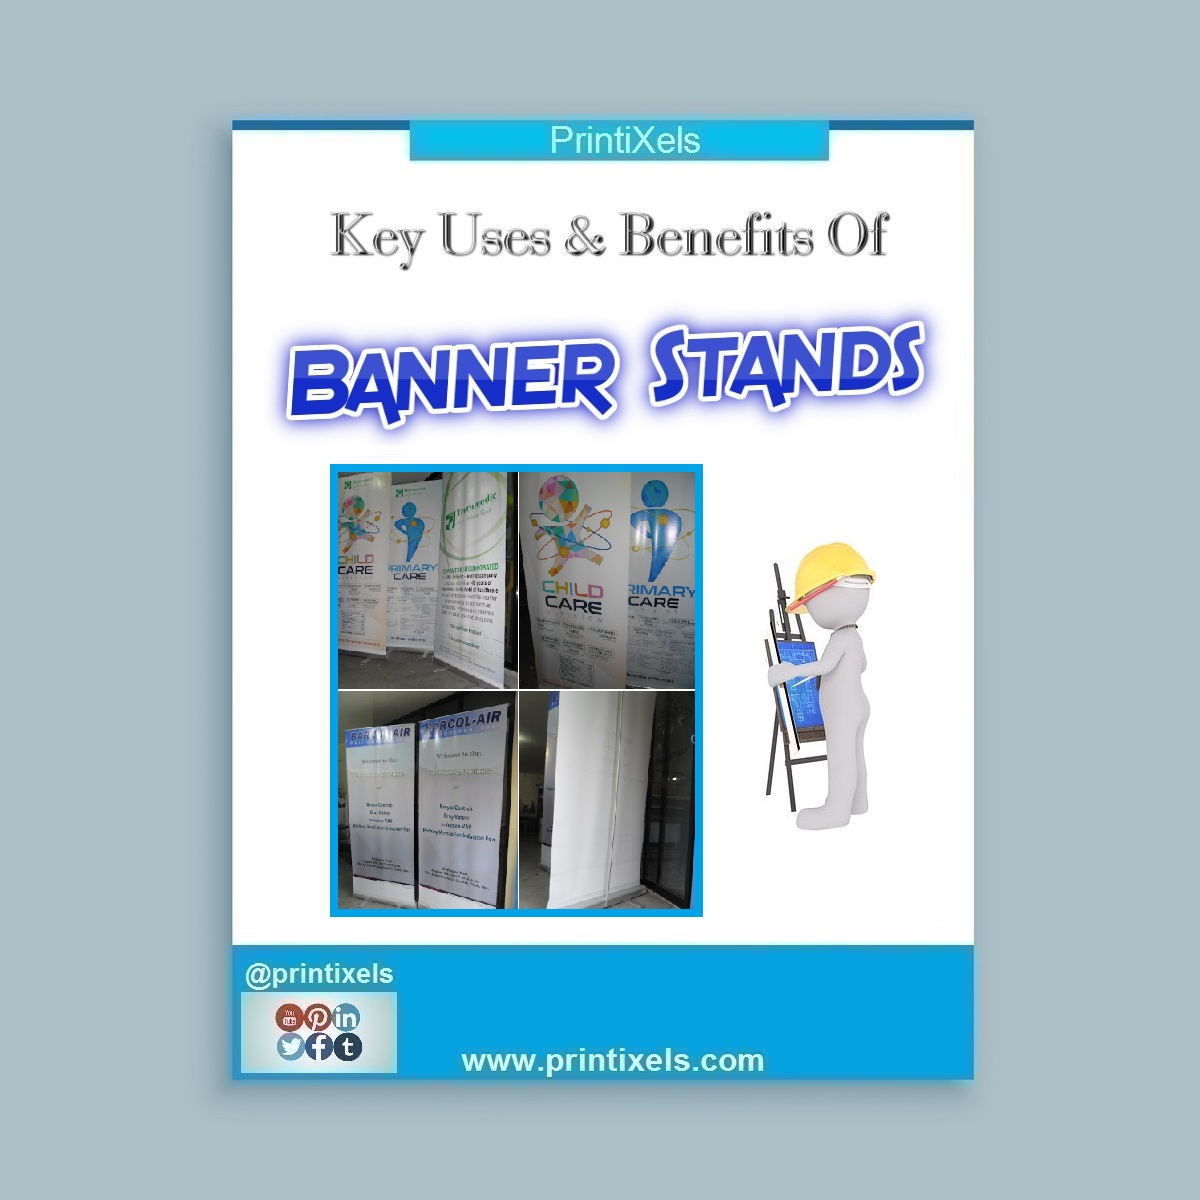 Key Uses & Benefits Of Banner Stands